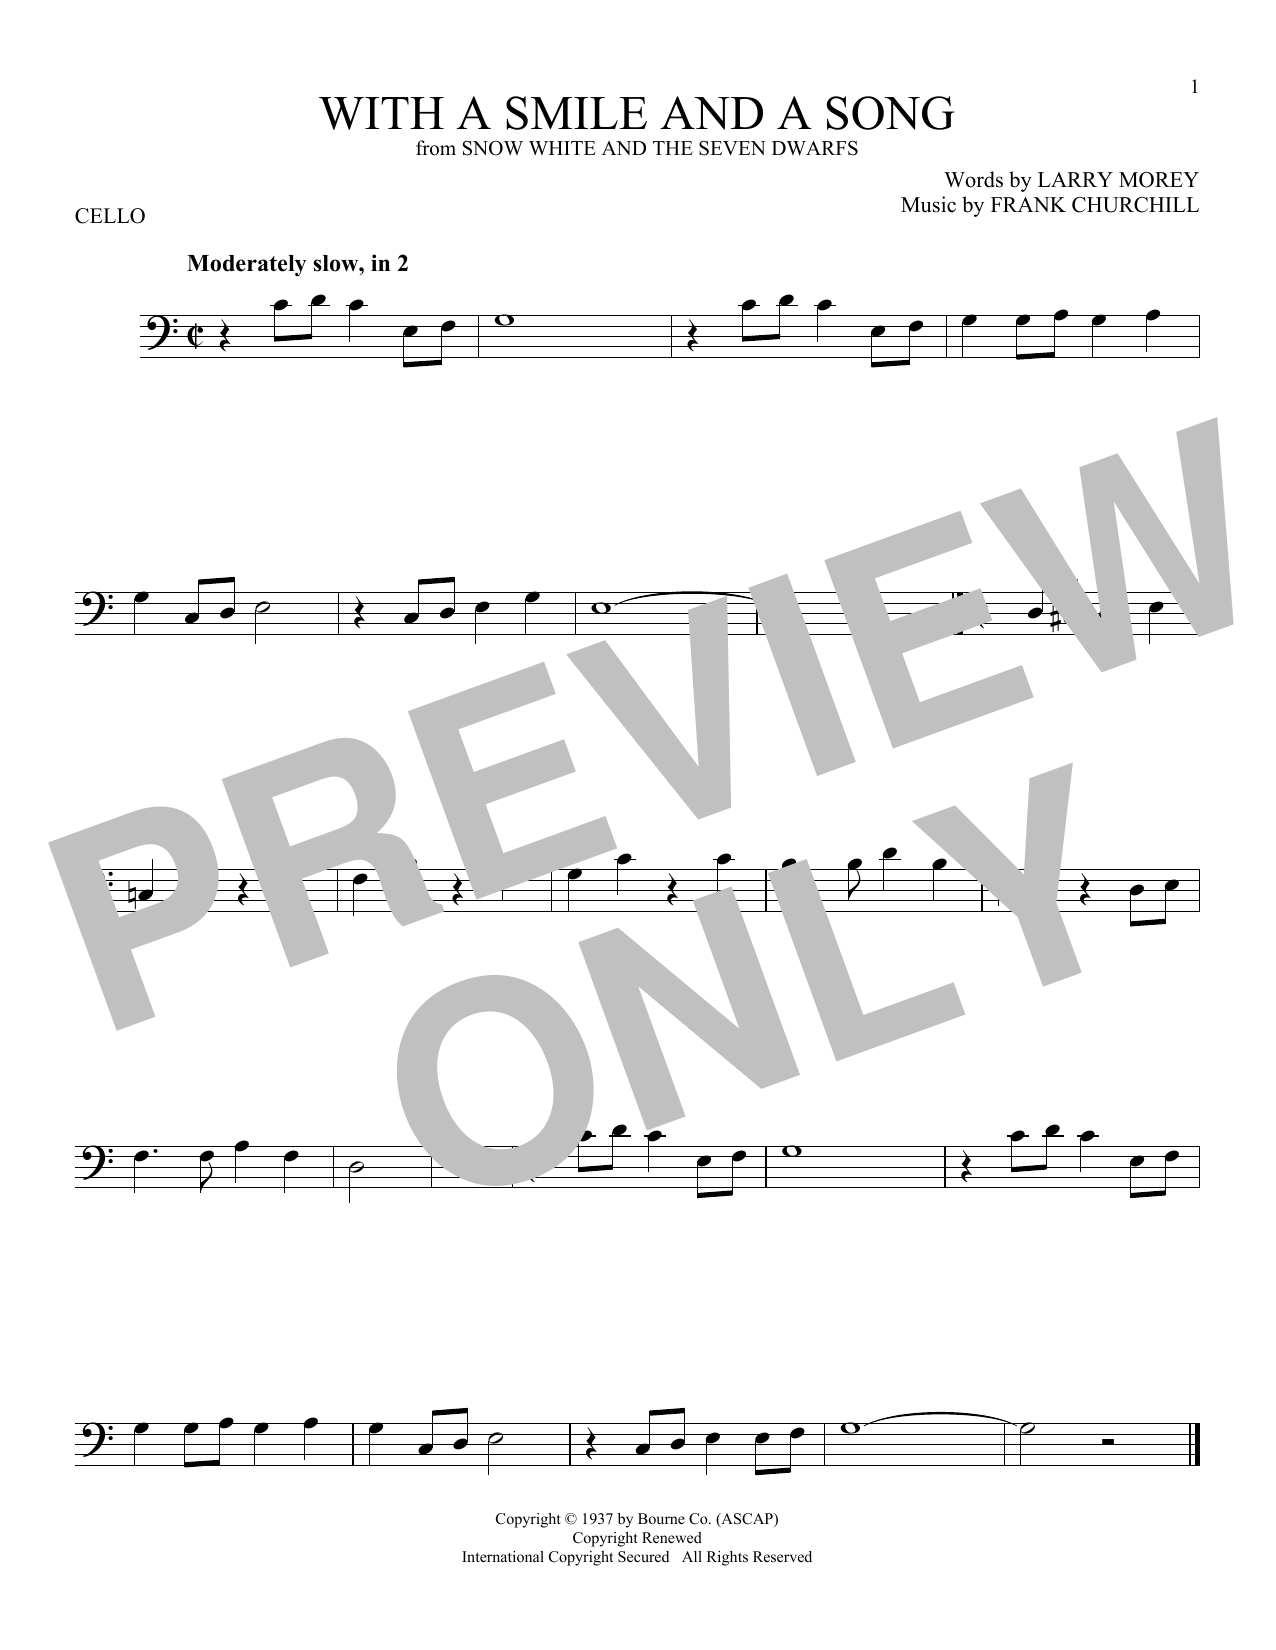 Download Frank Churchill With A Smile And A Song Sheet Music